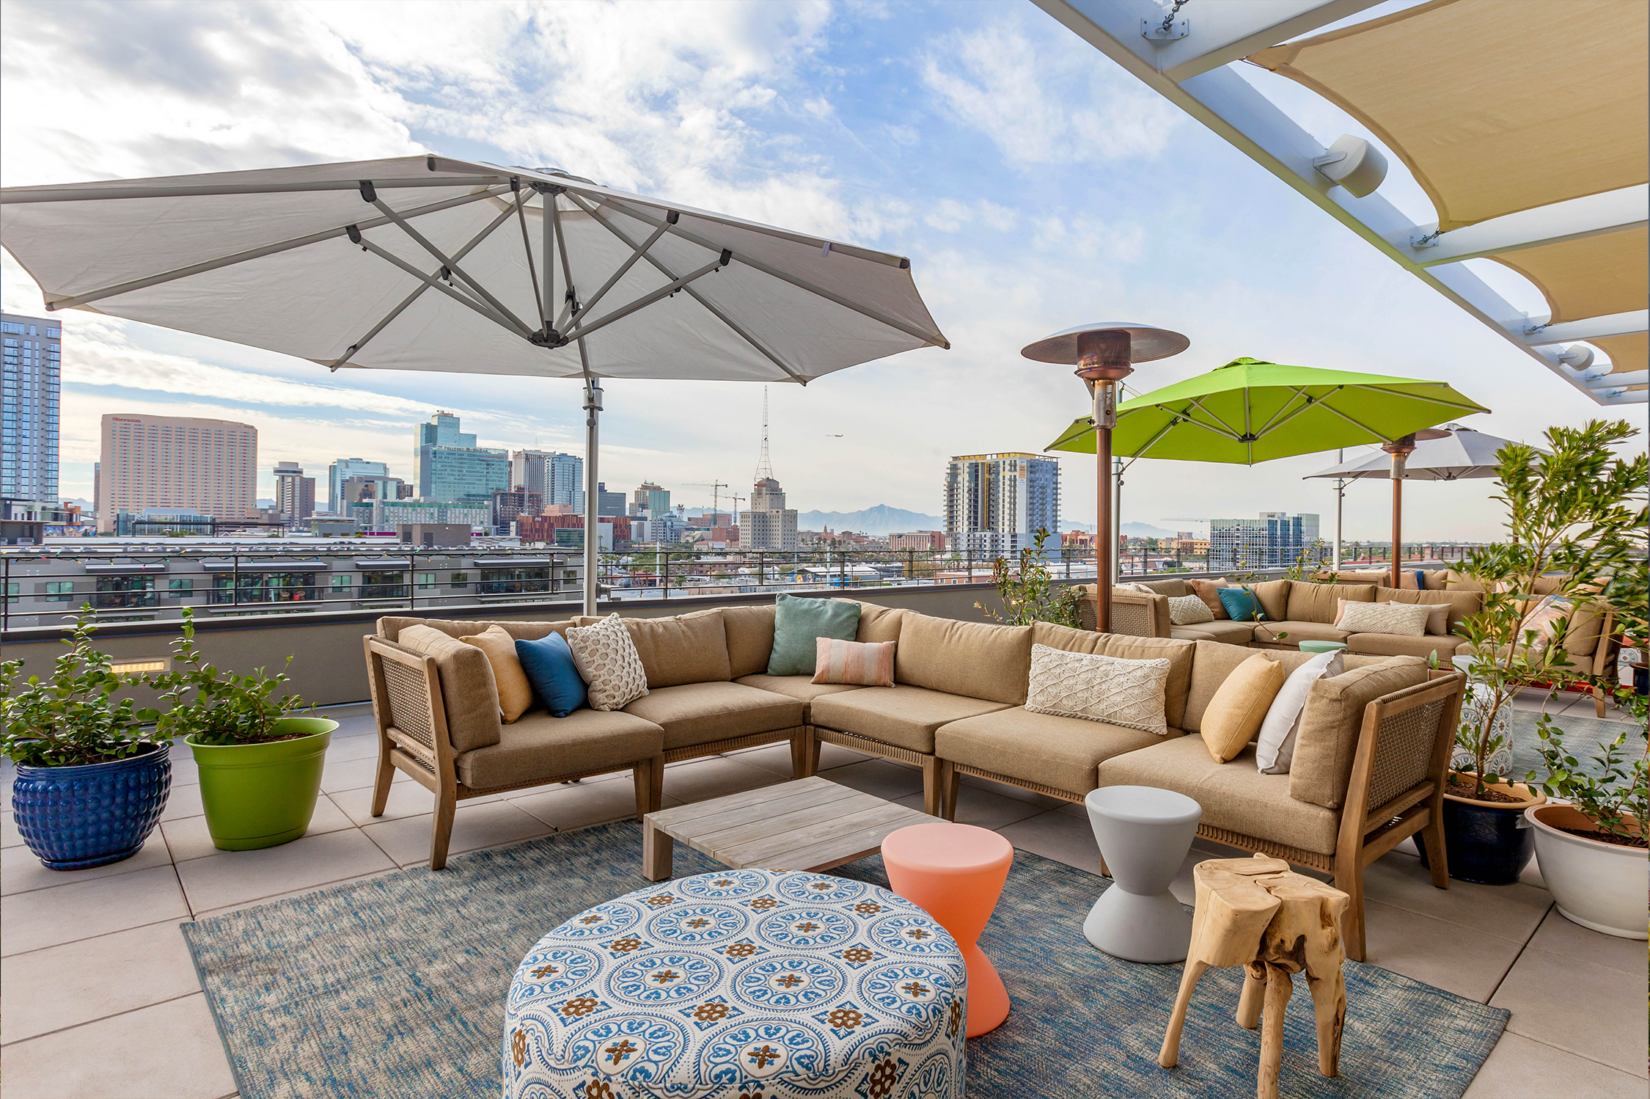 An outdoor balcony area with couches and umbrellas over looking the city of Phoenix.